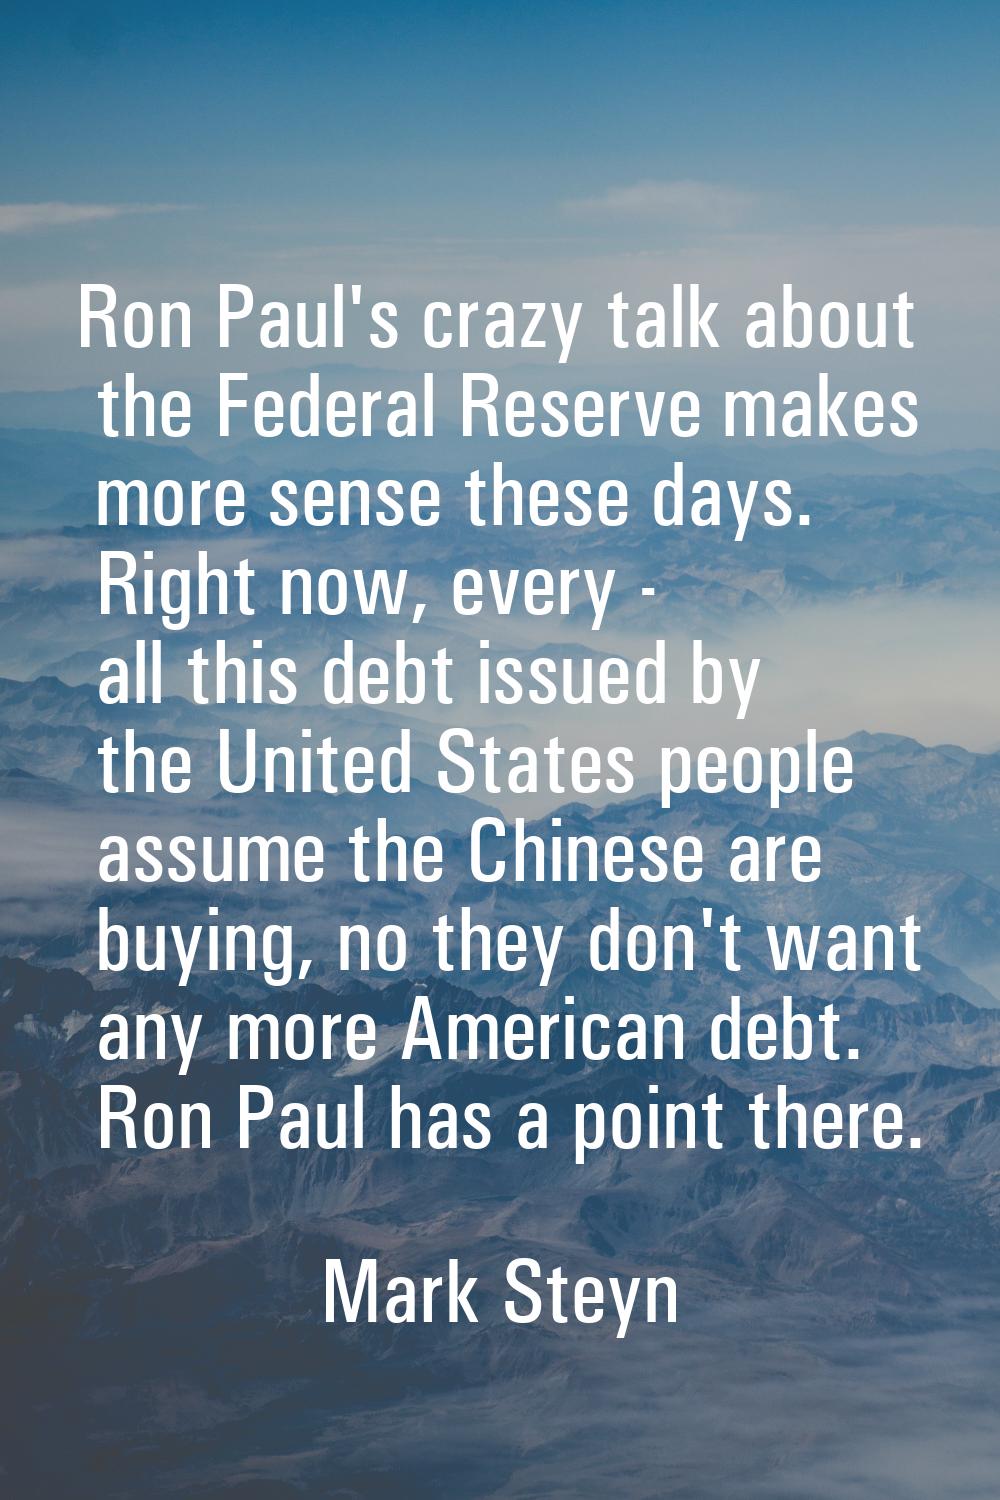 Ron Paul's crazy talk about the Federal Reserve makes more sense these days. Right now, every - all